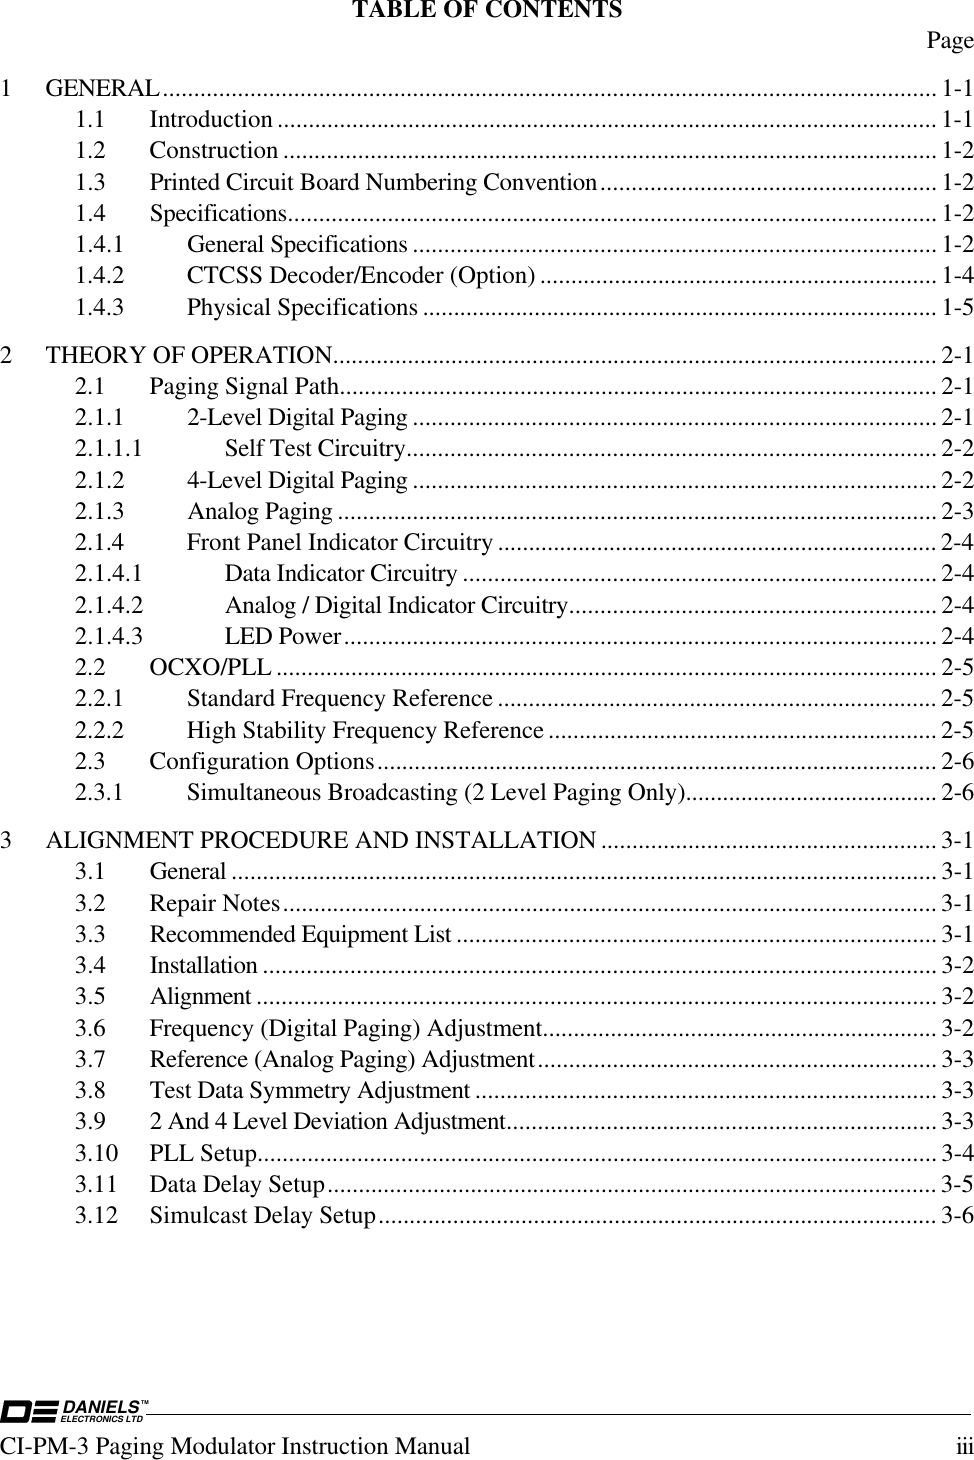 DANIELSELECTRONICS LTDTMCI-PM-3 Paging Modulator Instruction Manual iiiTABLE OF CONTENTS Page1 GENERAL............................................................................................................................ 1-11.1 Introduction .......................................................................................................... 1-11.2 Construction ......................................................................................................... 1-21.3 Printed Circuit Board Numbering Convention...................................................... 1-21.4 Specifications........................................................................................................ 1-21.4.1 General Specifications .................................................................................... 1-21.4.2 CTCSS Decoder/Encoder (Option) ................................................................ 1-41.4.3 Physical Specifications ................................................................................... 1-52 THEORY OF OPERATION................................................................................................. 2-12.1 Paging Signal Path................................................................................................ 2-12.1.1 2-Level Digital Paging .................................................................................... 2-12.1.1.1 Self Test Circuitry..................................................................................... 2-22.1.2 4-Level Digital Paging .................................................................................... 2-22.1.3 Analog Paging ................................................................................................ 2-32.1.4 Front Panel Indicator Circuitry ....................................................................... 2-42.1.4.1 Data Indicator Circuitry ............................................................................ 2-42.1.4.2 Analog / Digital Indicator Circuitry........................................................... 2-42.1.4.3 LED Power............................................................................................... 2-42.2 OCXO/PLL .......................................................................................................... 2-52.2.1 Standard Frequency Reference ....................................................................... 2-52.2.2 High Stability Frequency Reference ............................................................... 2-52.3 Configuration Options.......................................................................................... 2-62.3.1 Simultaneous Broadcasting (2 Level Paging Only)......................................... 2-63 ALIGNMENT PROCEDURE AND INSTALLATION ...................................................... 3-13.1 General ................................................................................................................. 3-13.2 Repair Notes......................................................................................................... 3-13.3 Recommended Equipment List ............................................................................. 3-13.4 Installation ............................................................................................................ 3-23.5 Alignment ............................................................................................................. 3-23.6 Frequency (Digital Paging) Adjustment................................................................ 3-23.7 Reference (Analog Paging) Adjustment................................................................ 3-33.8 Test Data Symmetry Adjustment .......................................................................... 3-33.9 2 And 4 Level Deviation Adjustment..................................................................... 3-33.10 PLL Setup............................................................................................................. 3-43.11 Data Delay Setup.................................................................................................. 3-53.12 Simulcast Delay Setup.......................................................................................... 3-6